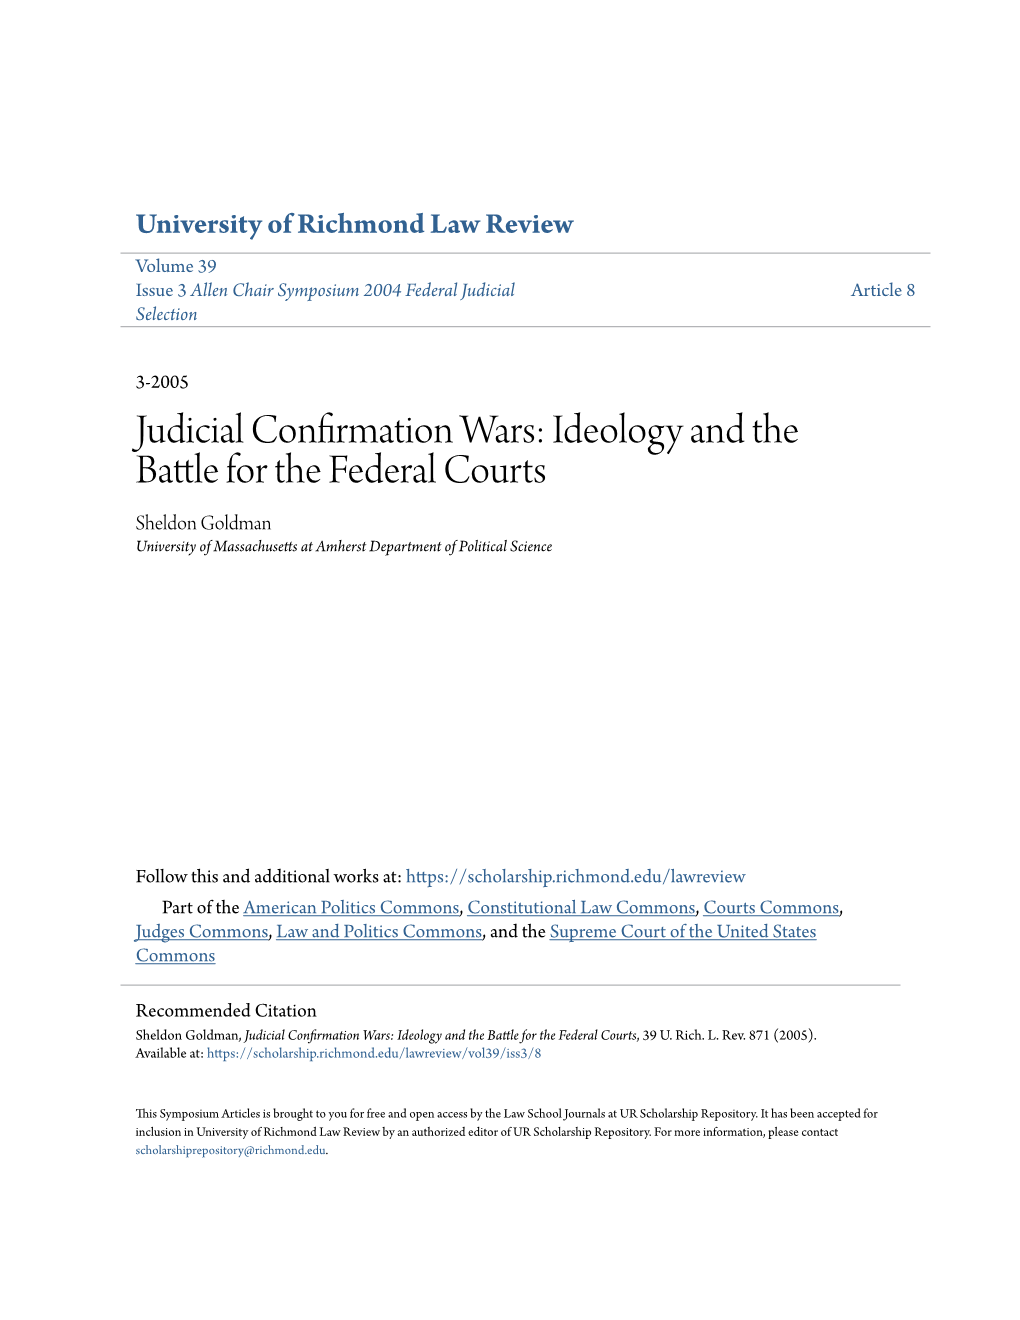 Judicial Confirmation Wars: Ideology and the Battle for the Federal Courts, 39 U